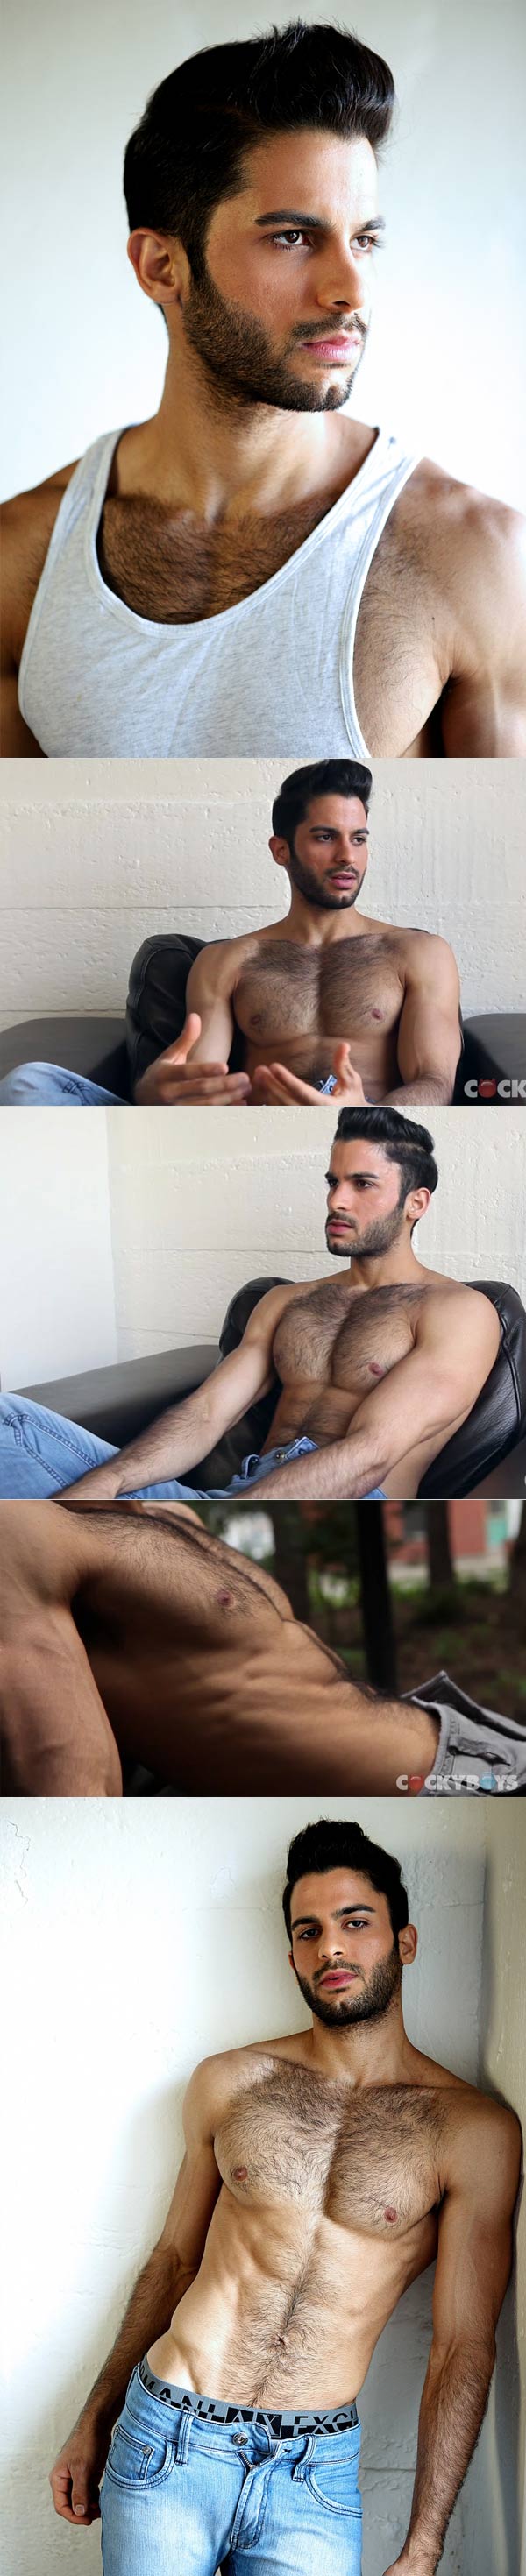 Tony Milan (Opens Up and Unloads!) at CockyBoys.com